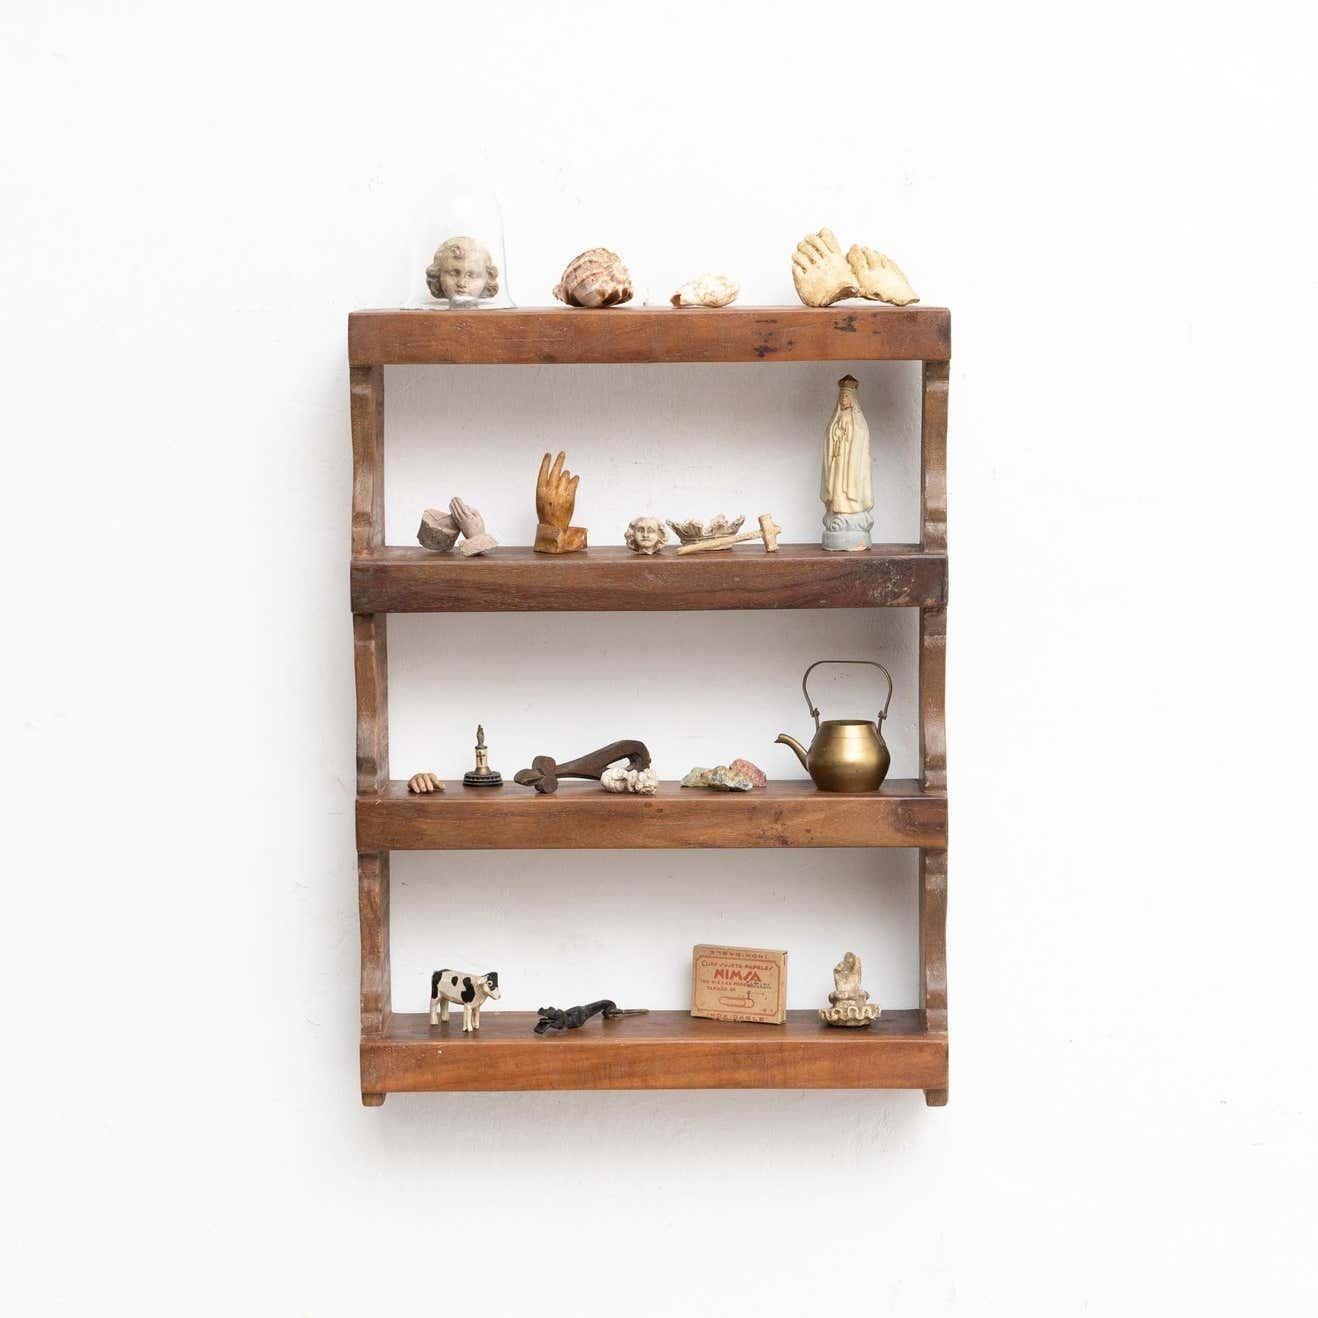 Cabinet of curiosities of plaster figures and pieces in a wooden shelve.

Made in Spain, circa 1950.

In original condition, with minor wear consistent with age and use, preserving a beautiful patina.

Materials:
Plaster.
Wood

The sculptural part